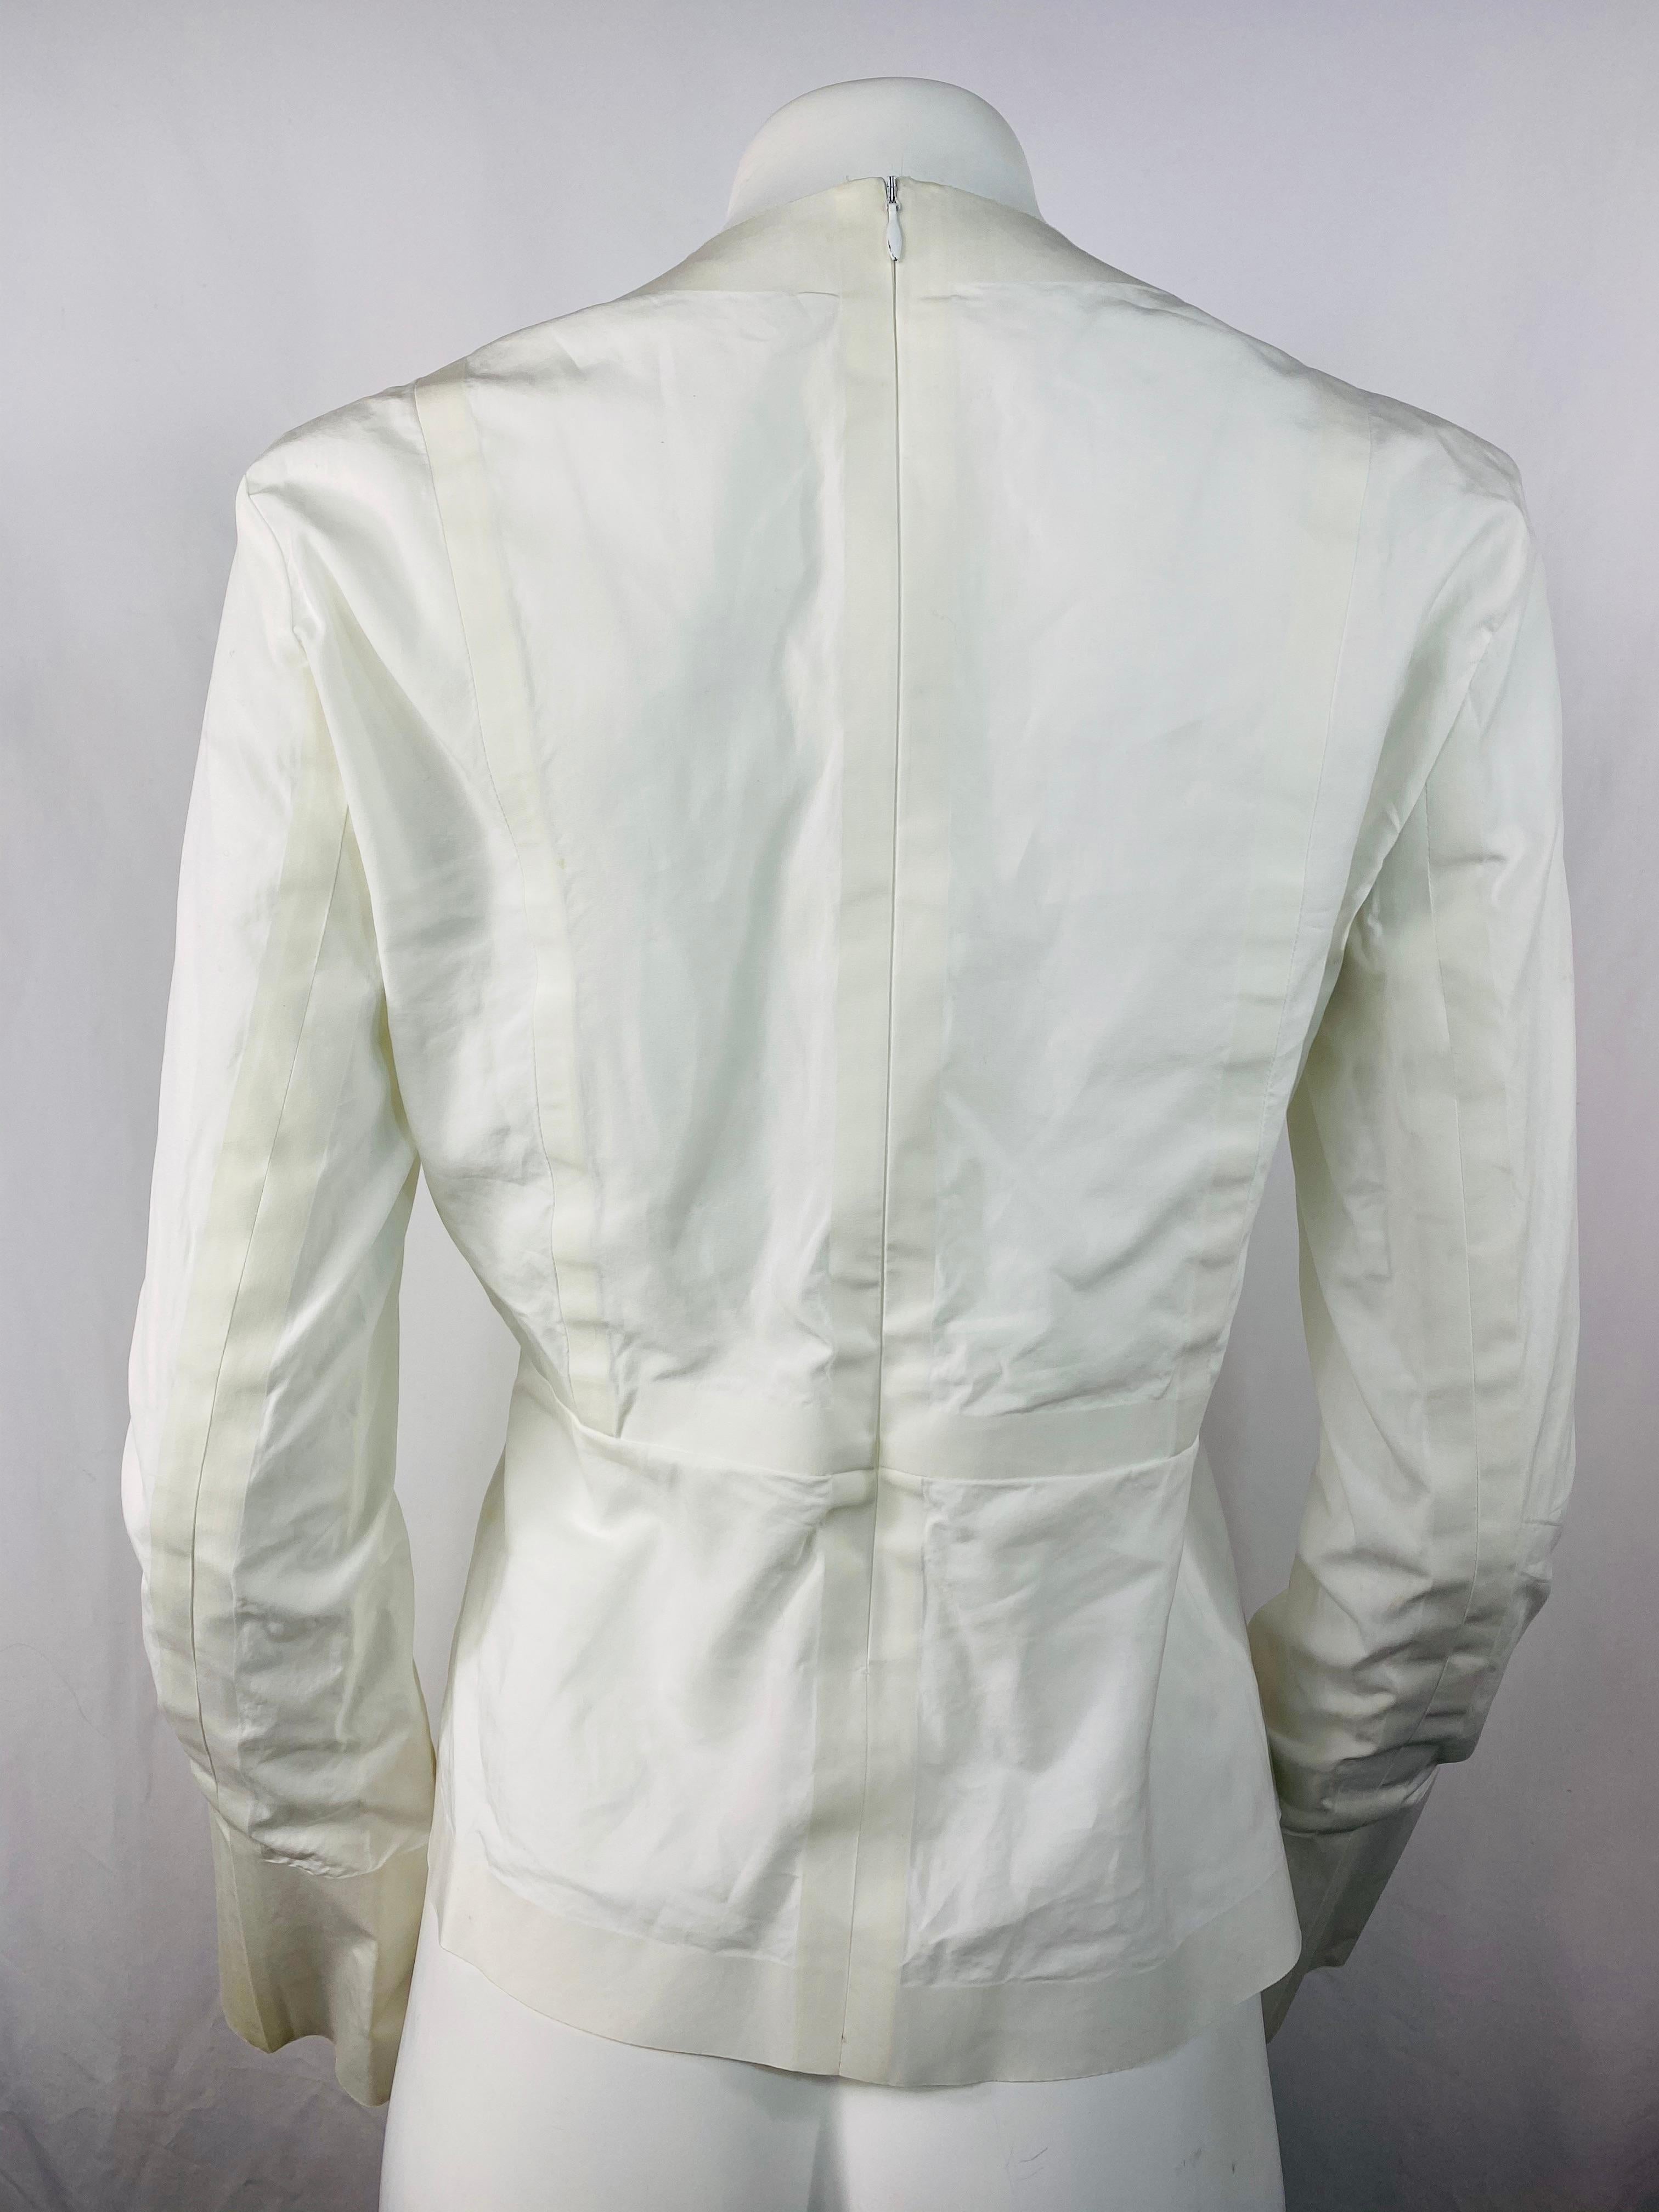 Celine White Cotton Long Sleeves Blouse Top Size 40 In Good Condition For Sale In Beverly Hills, CA